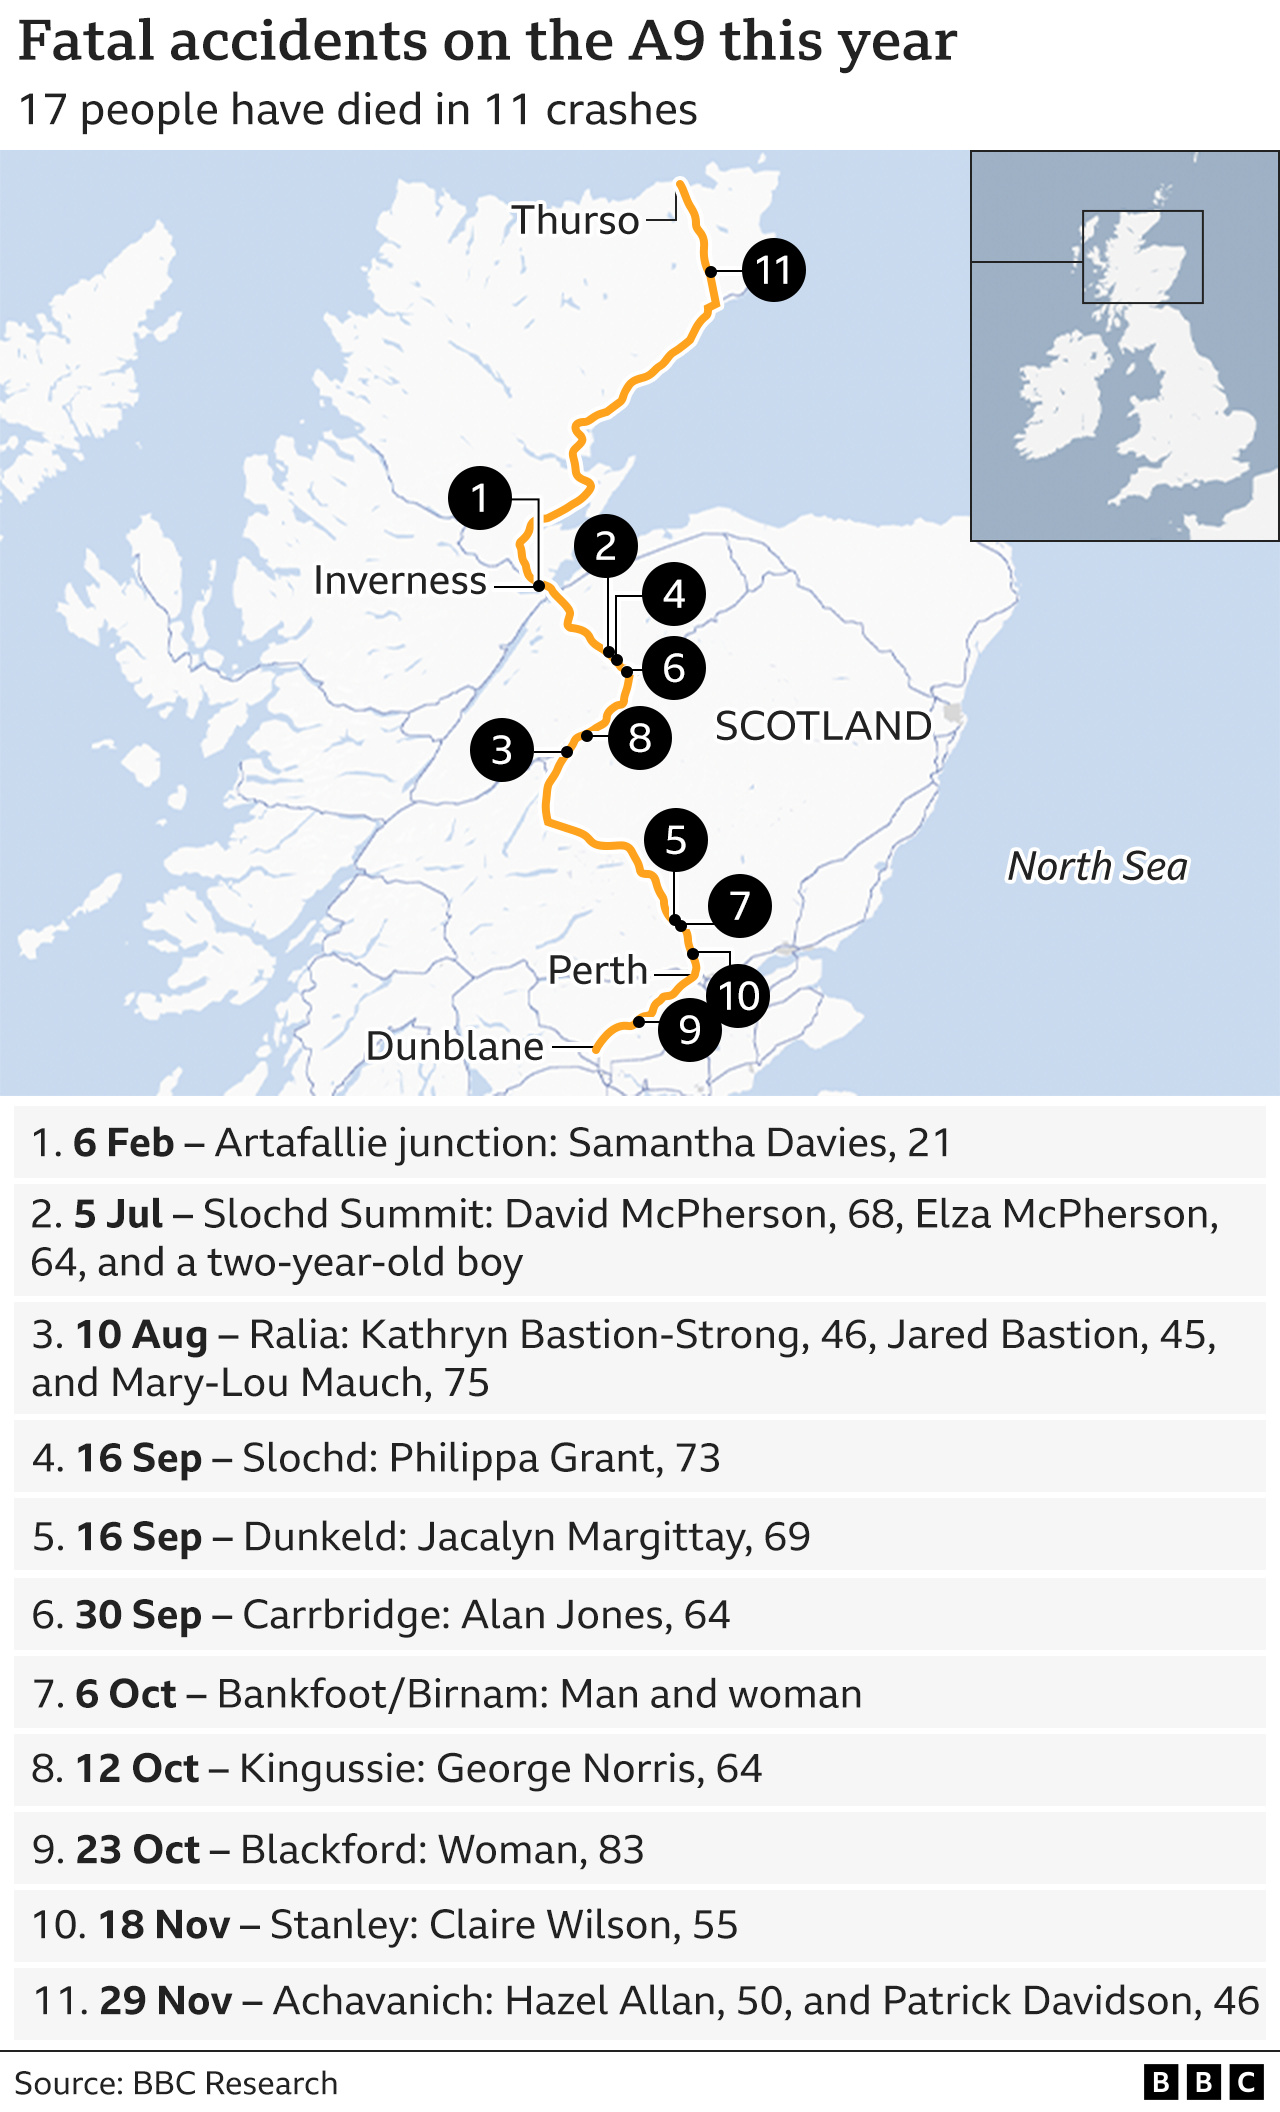 fatal crashes on the A9 this year